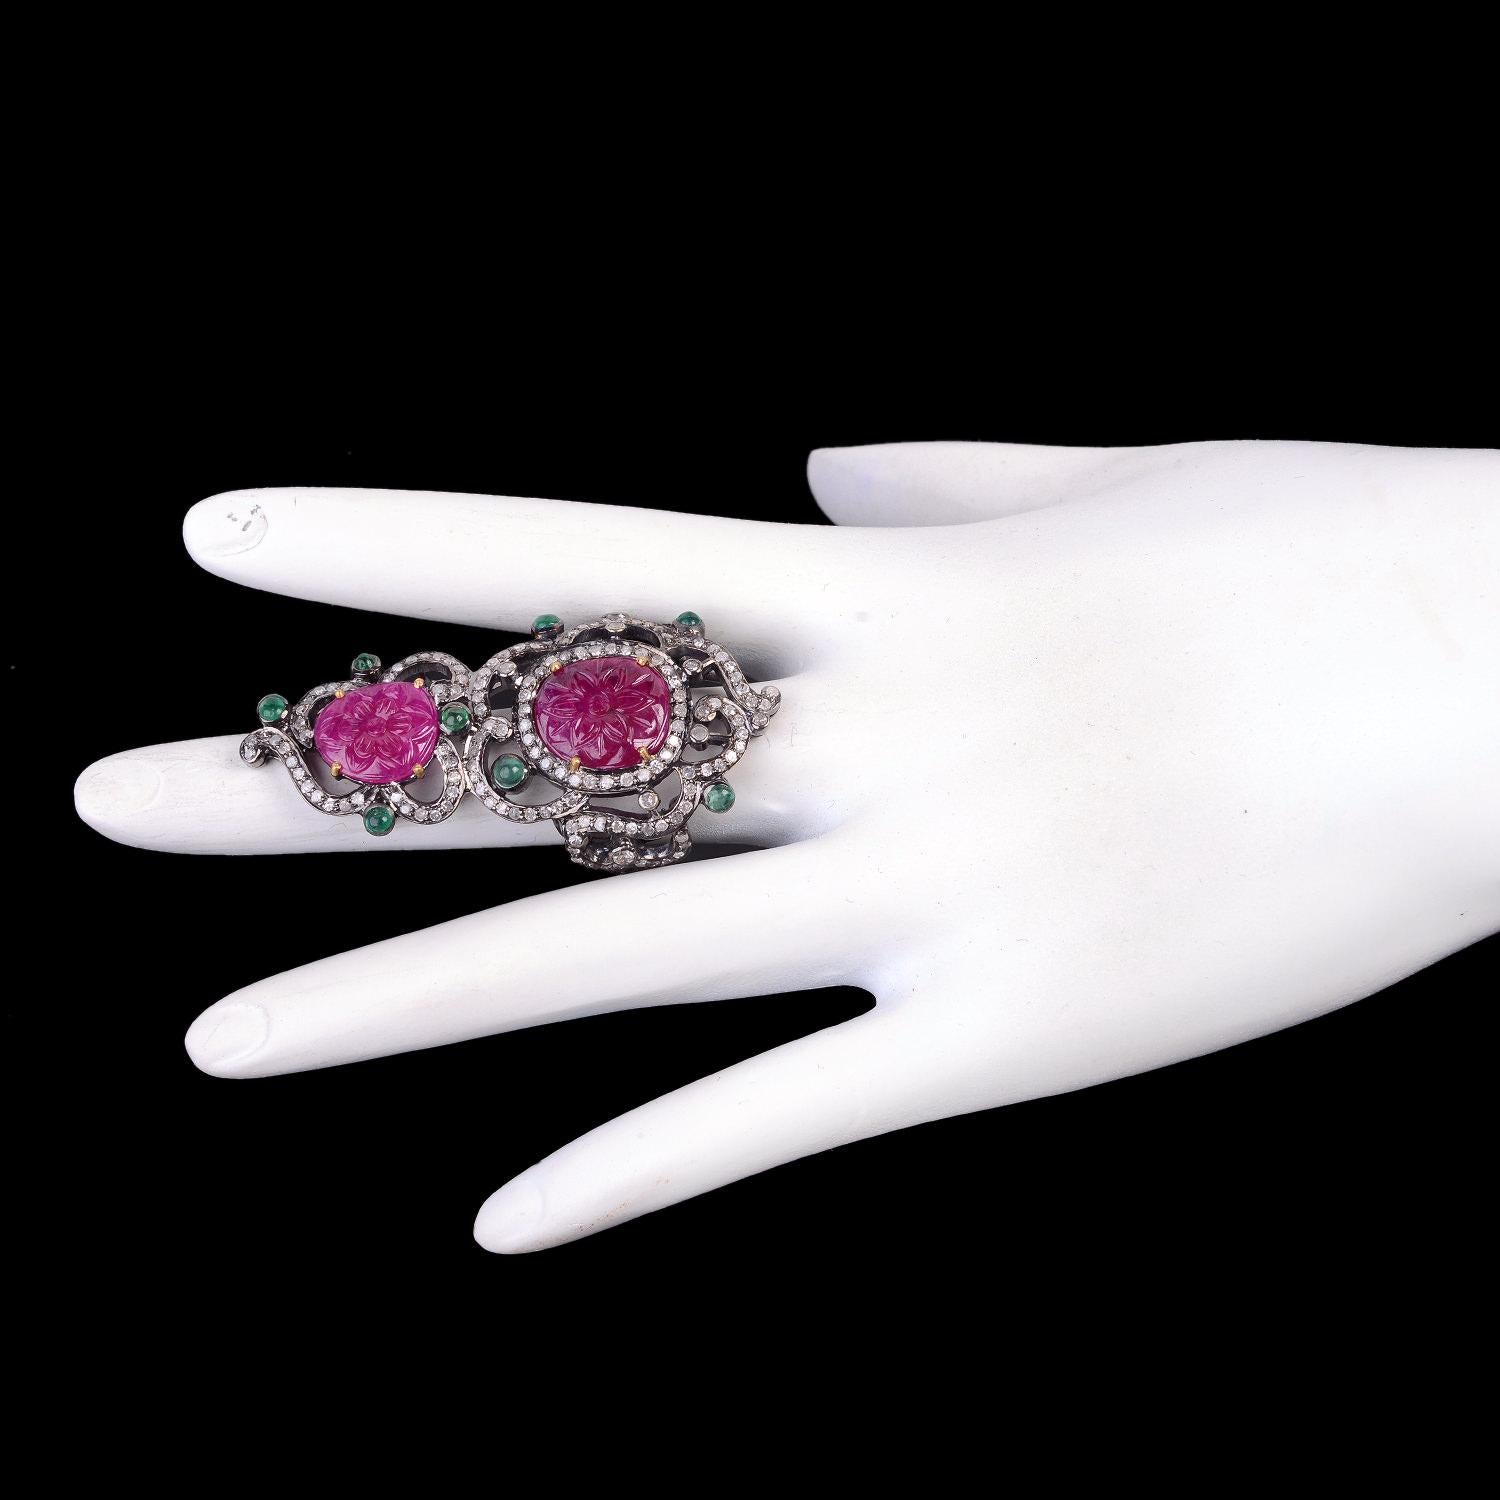 One of a Kind this Designer Hand Craved Ruby Ring with Diamonds and Emeralds in Gold and Silver is lovely for any occasion.

Ring Size: 7 ( Can be sized )

18kt Gold:2.3gms
Diamond:2.01cts
Slver:8.5gms
Emerald:0.60cts
Ruby:7.20cts
